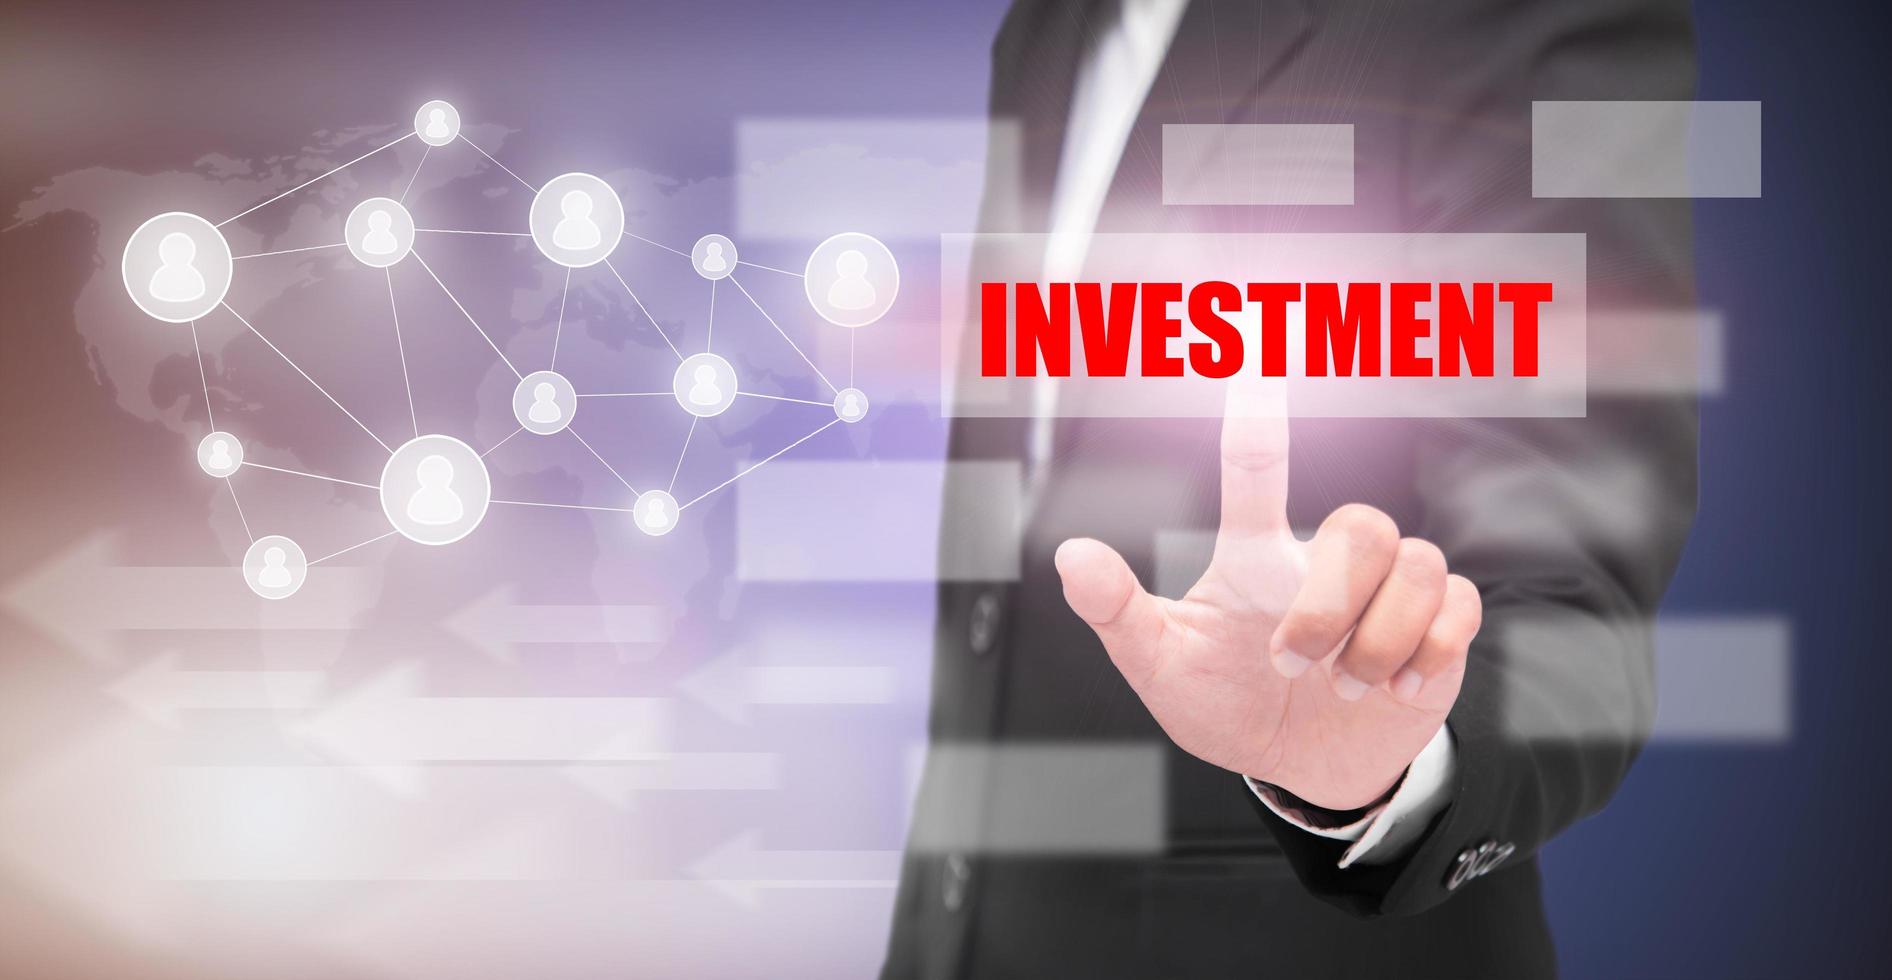 hand touch Investment text, business concept photo